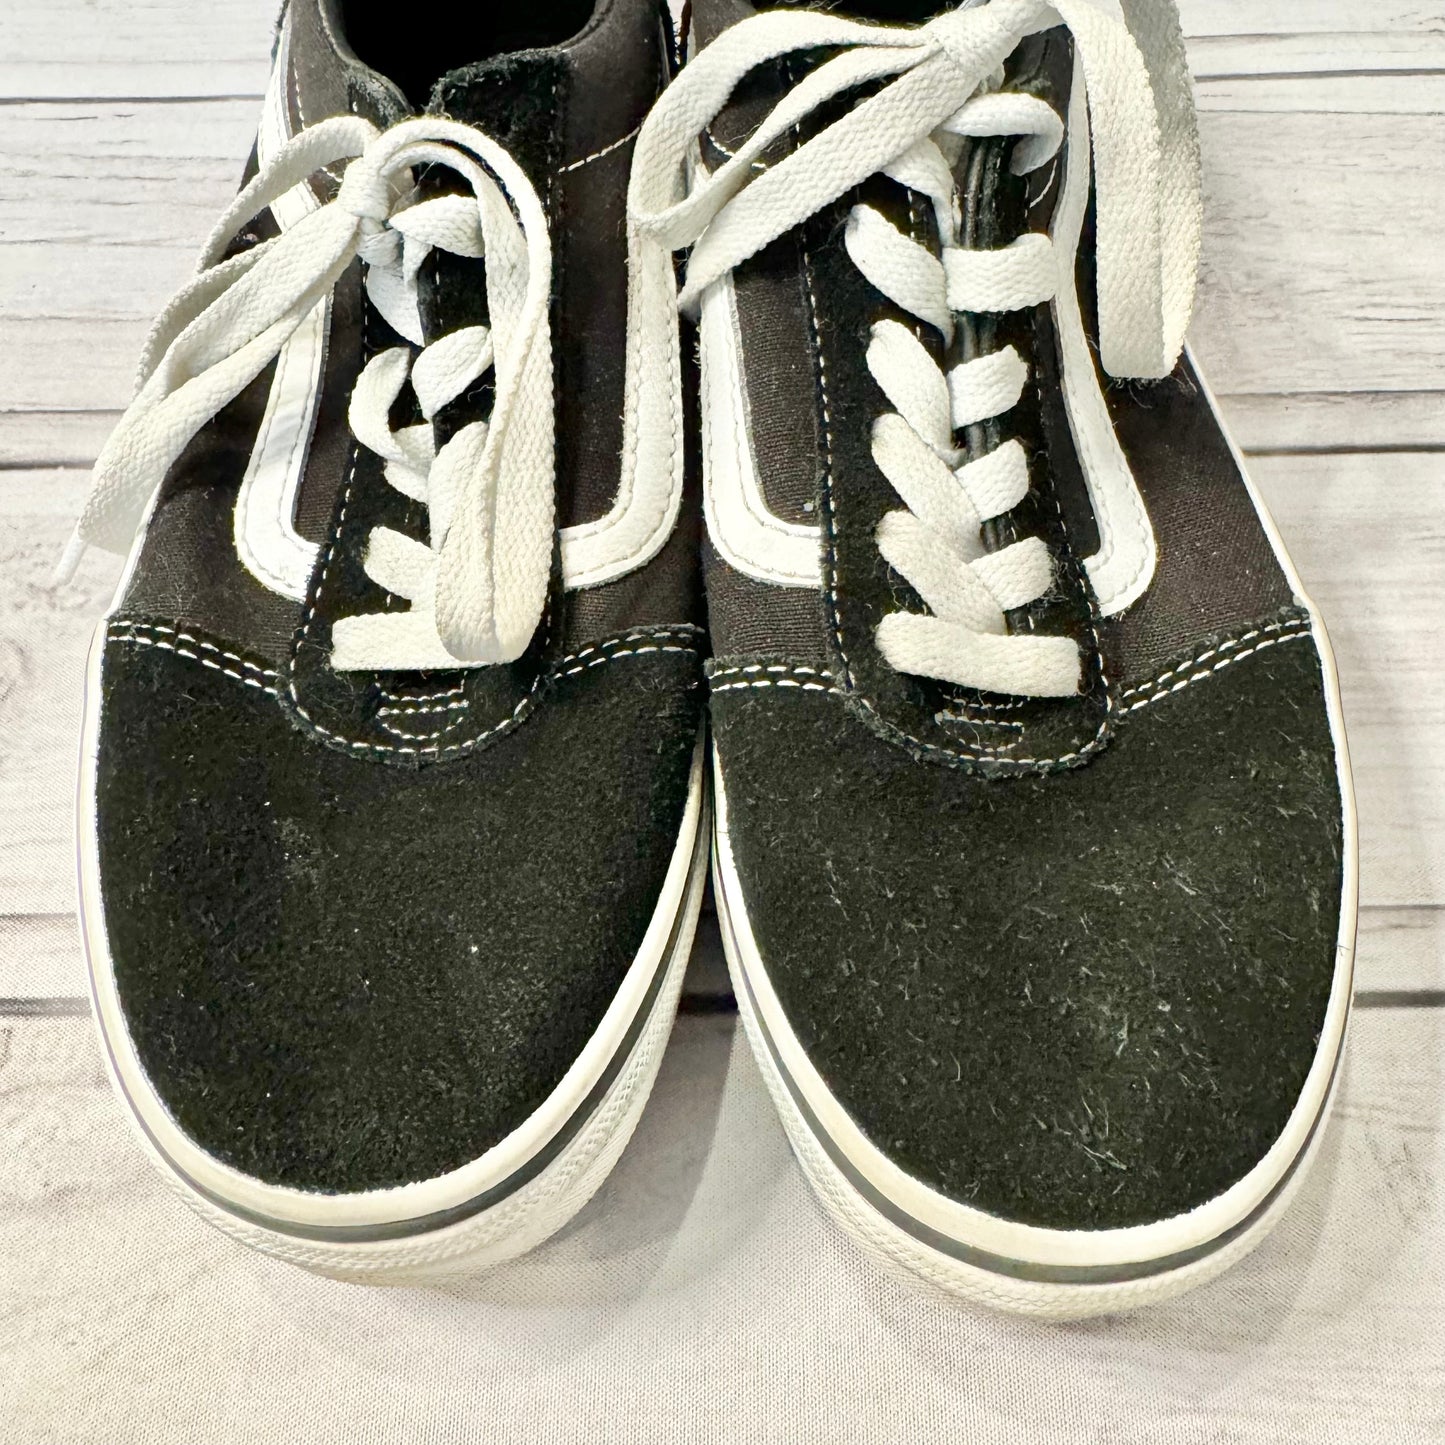 Shoes Sneakers By Vans  Size: 5.5